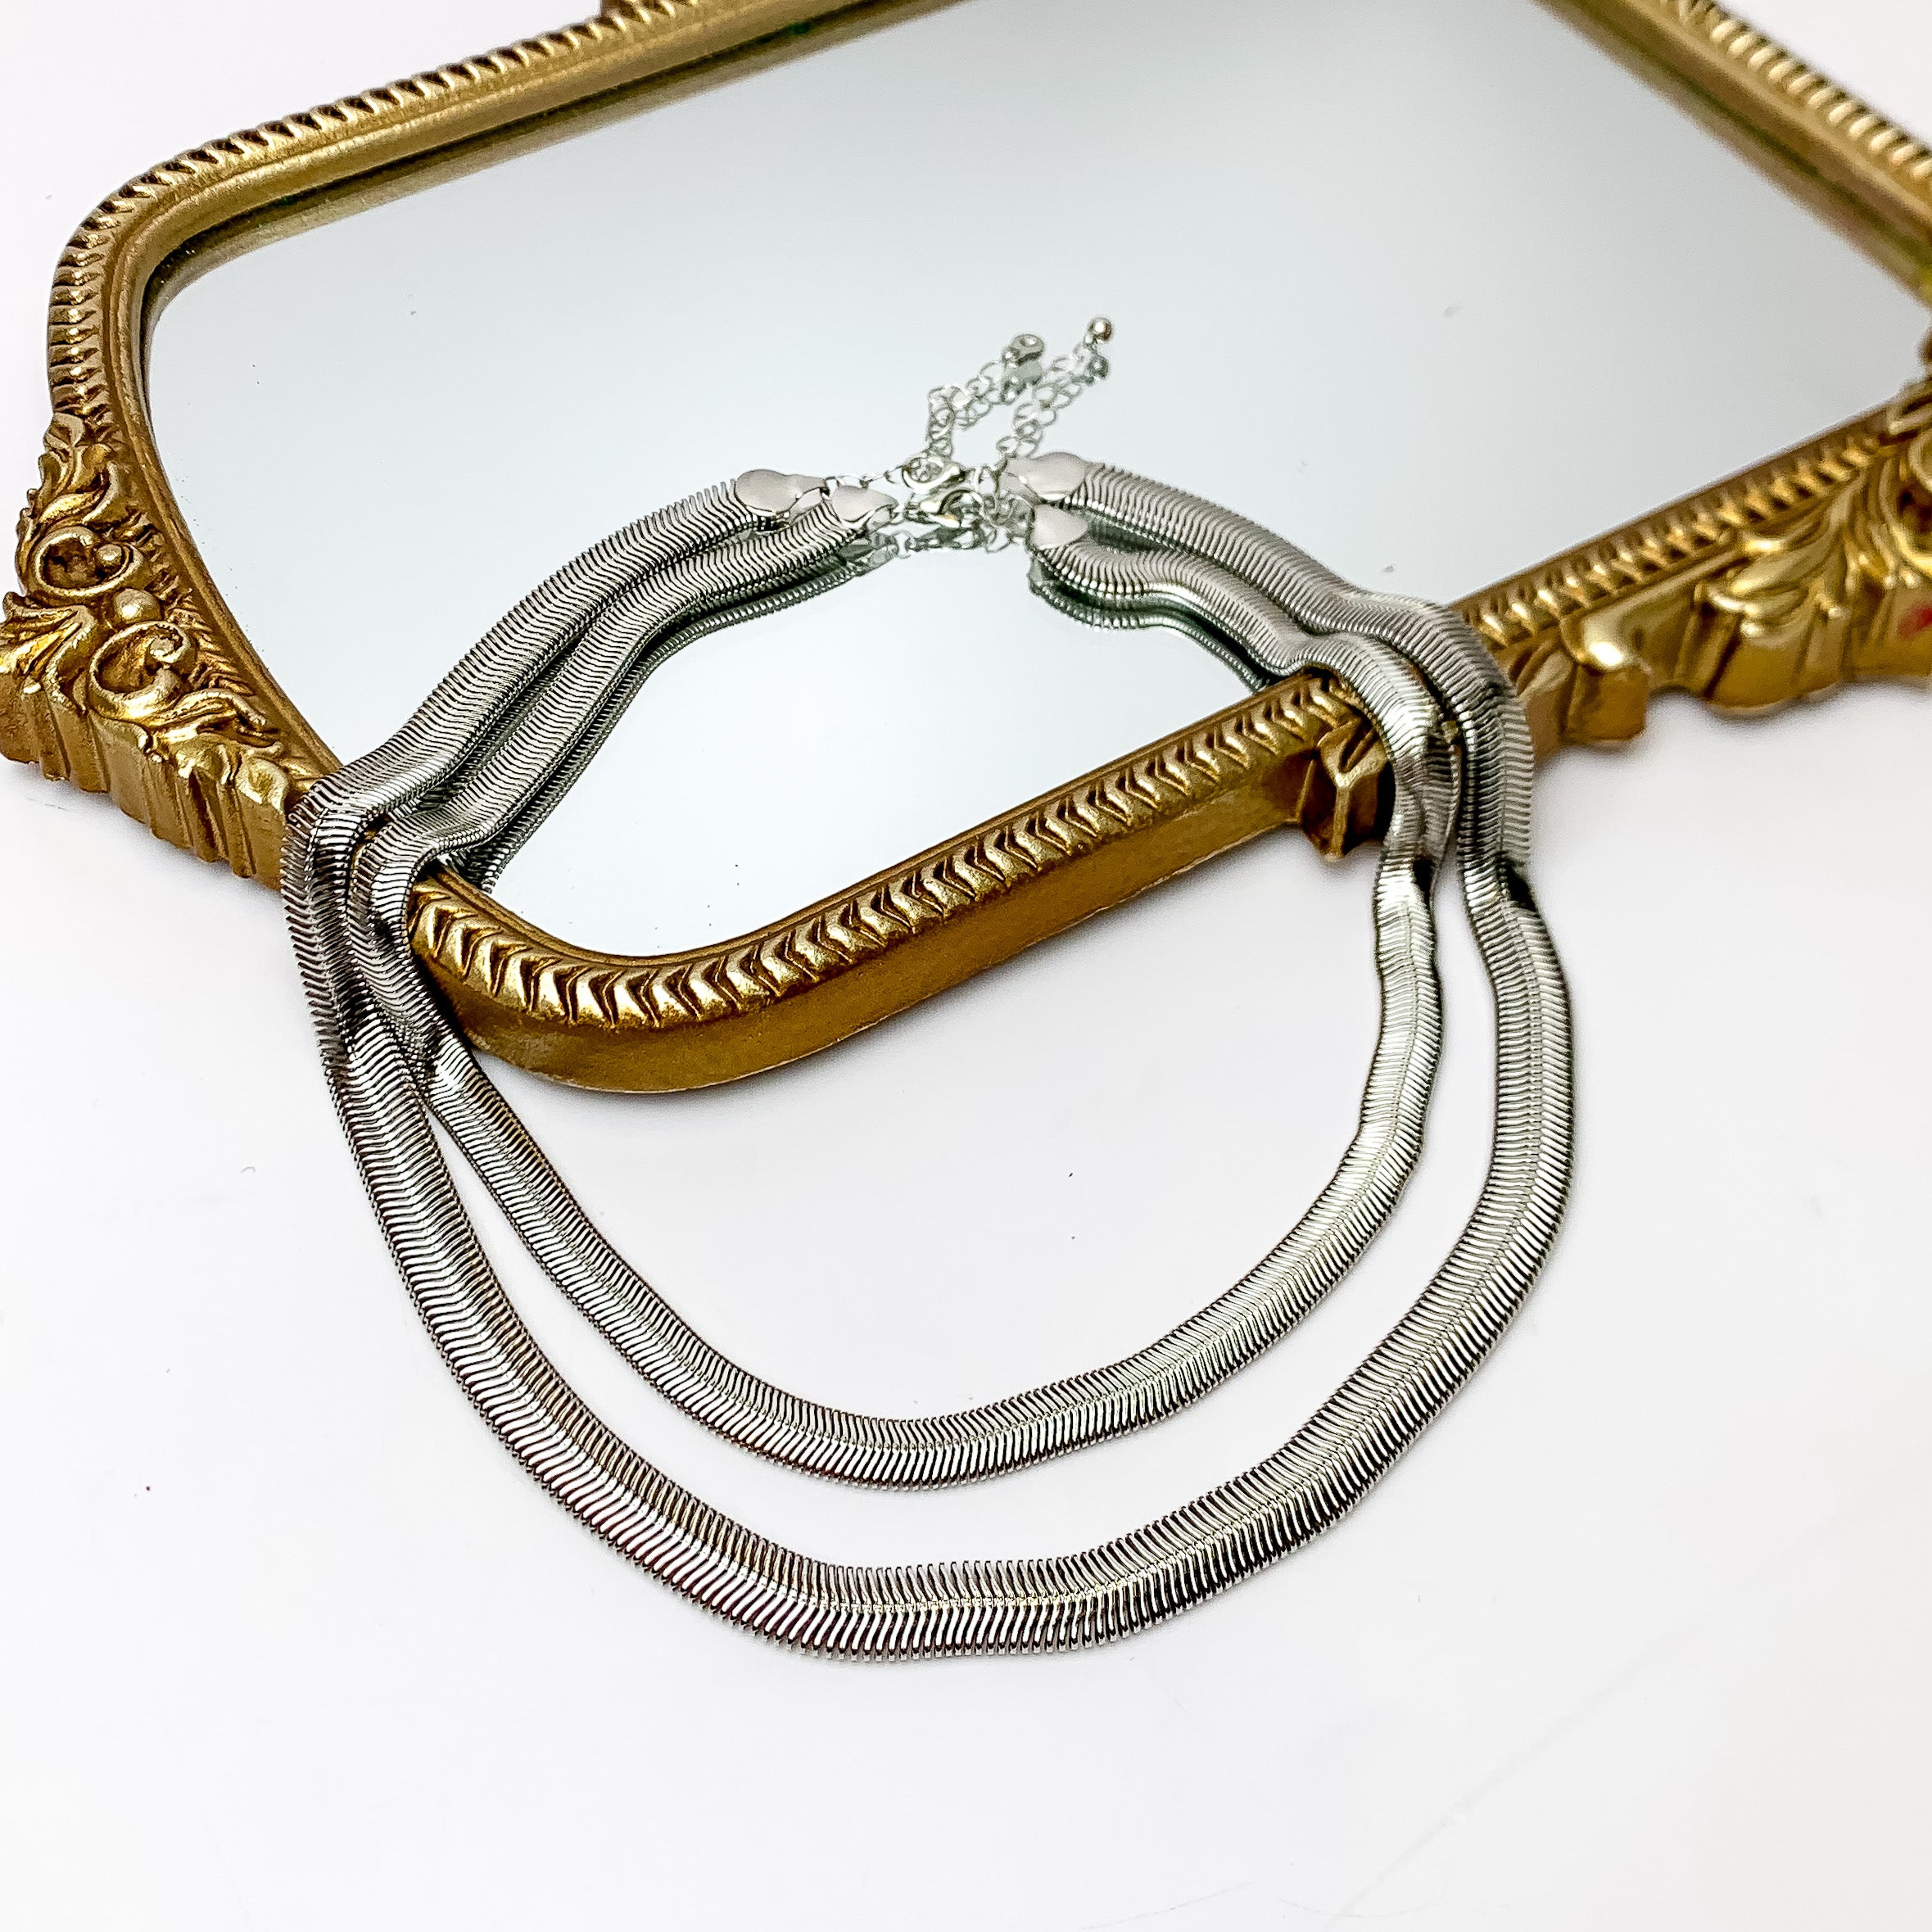 Daily Basis Silver Tone Double Chain Necklace. Pictured on a white background with part of the necklace on a mirror with a gold frame.